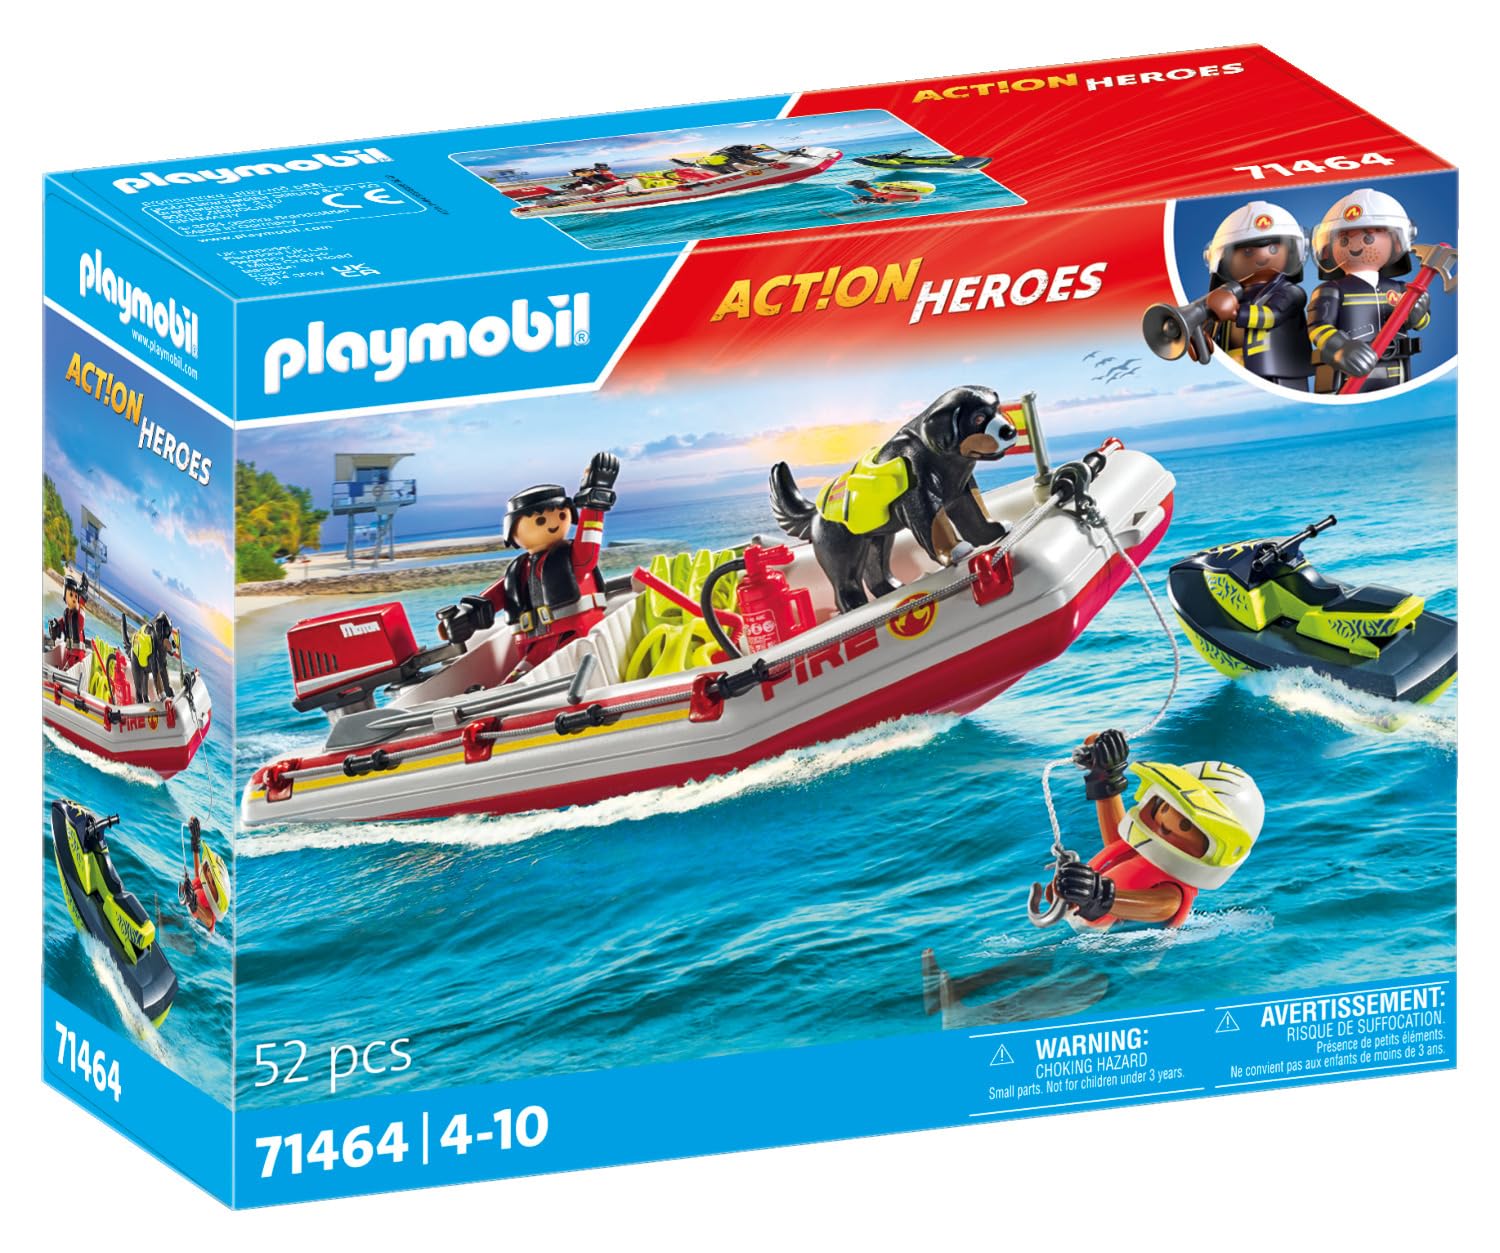 Playmobil 71464 Action Heroes: Fireboat with Water Scooter, exciting Water Rescue, Fun Imaginative Role Play, Realistic playsets Suitable for Children Ages 4+